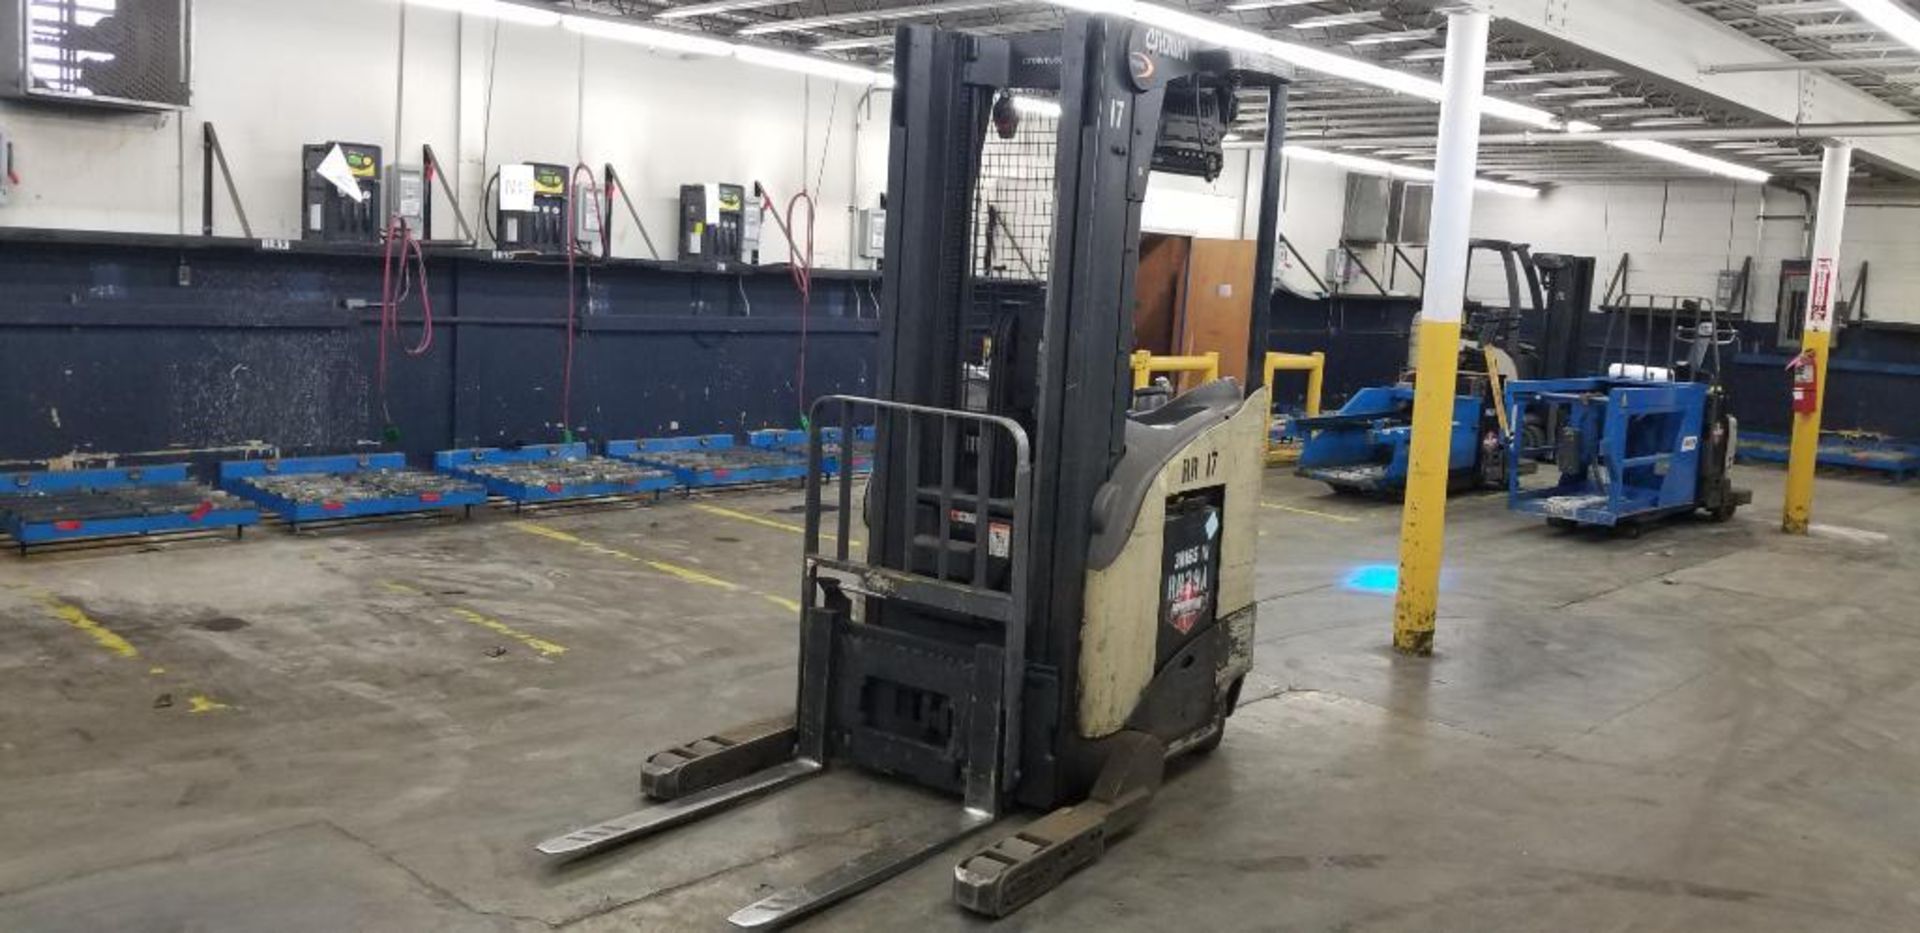 Crown RR 5200 Series Electric Reach Truck, Model RR5220-45, S/N 1A274886, 4,500 LB. Lift Capacity, 2 - Image 2 of 8